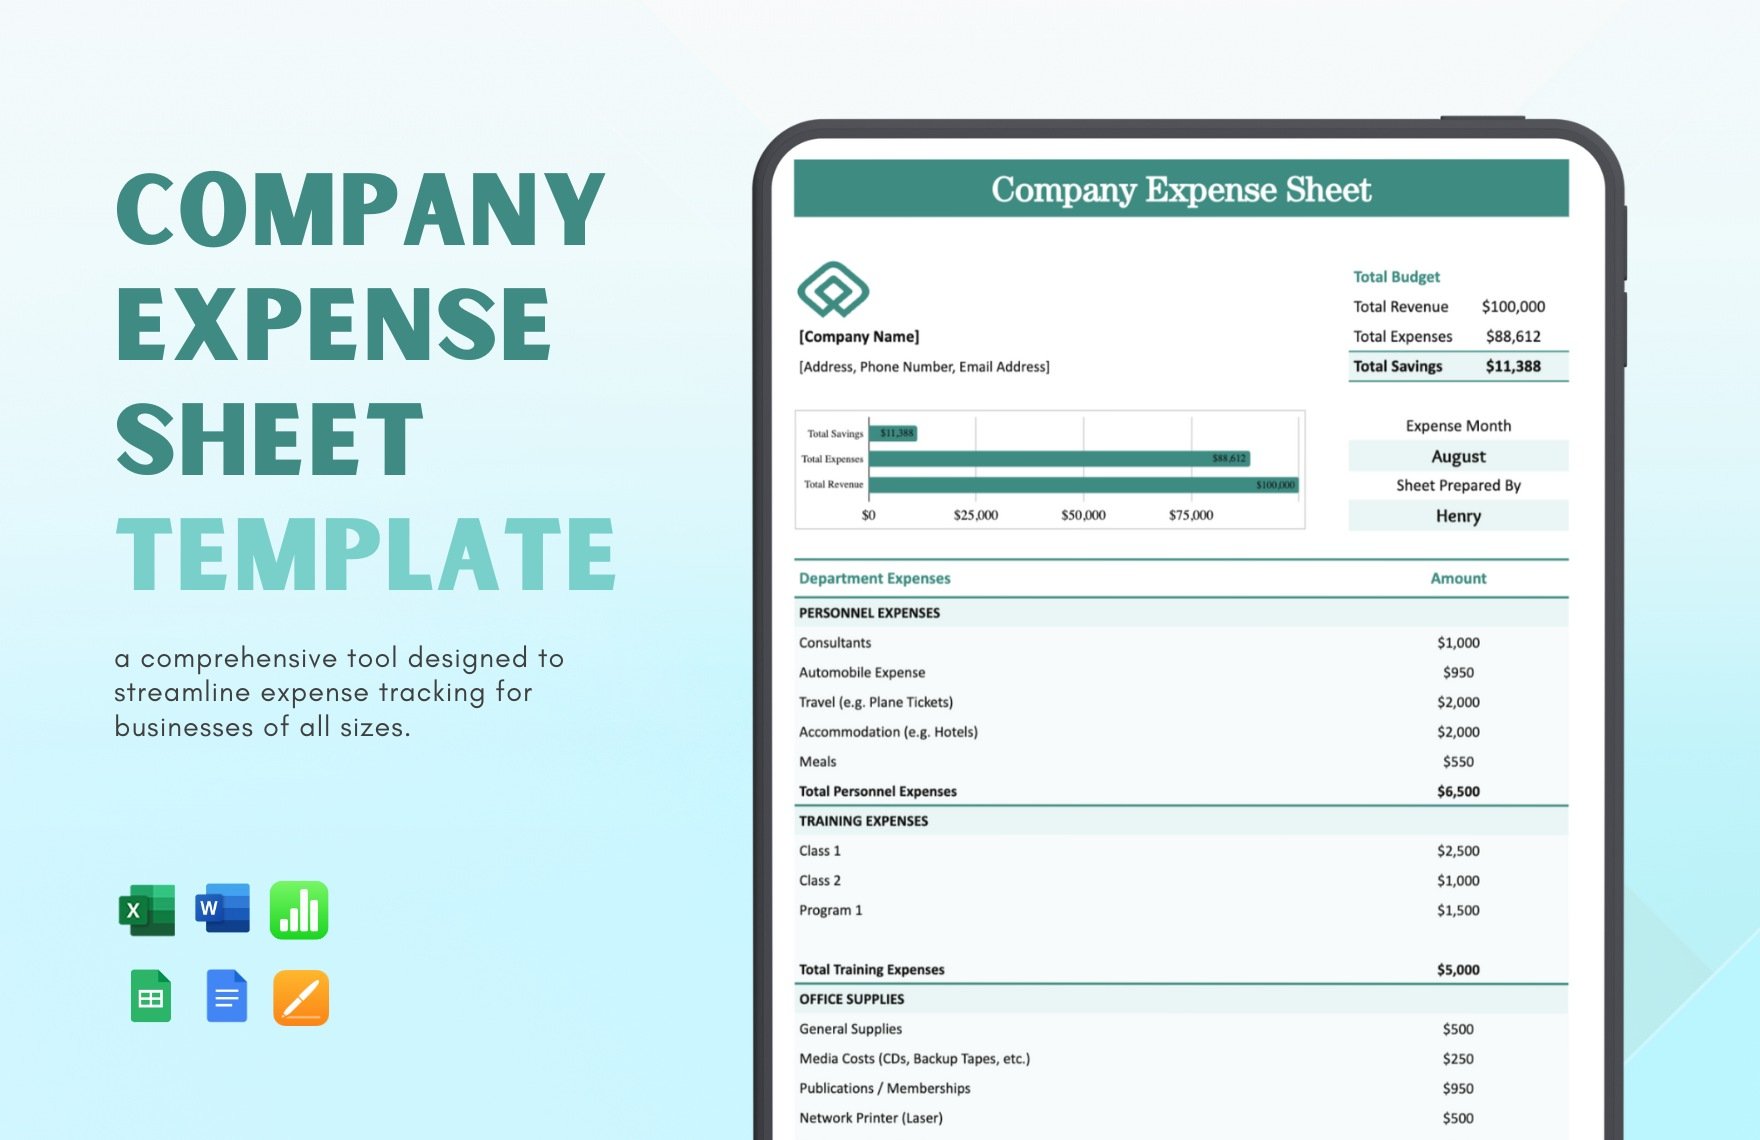 Company Expense Sheet Template in Word, Google Docs, Excel, Google Sheets, Apple Pages, Apple Numbers